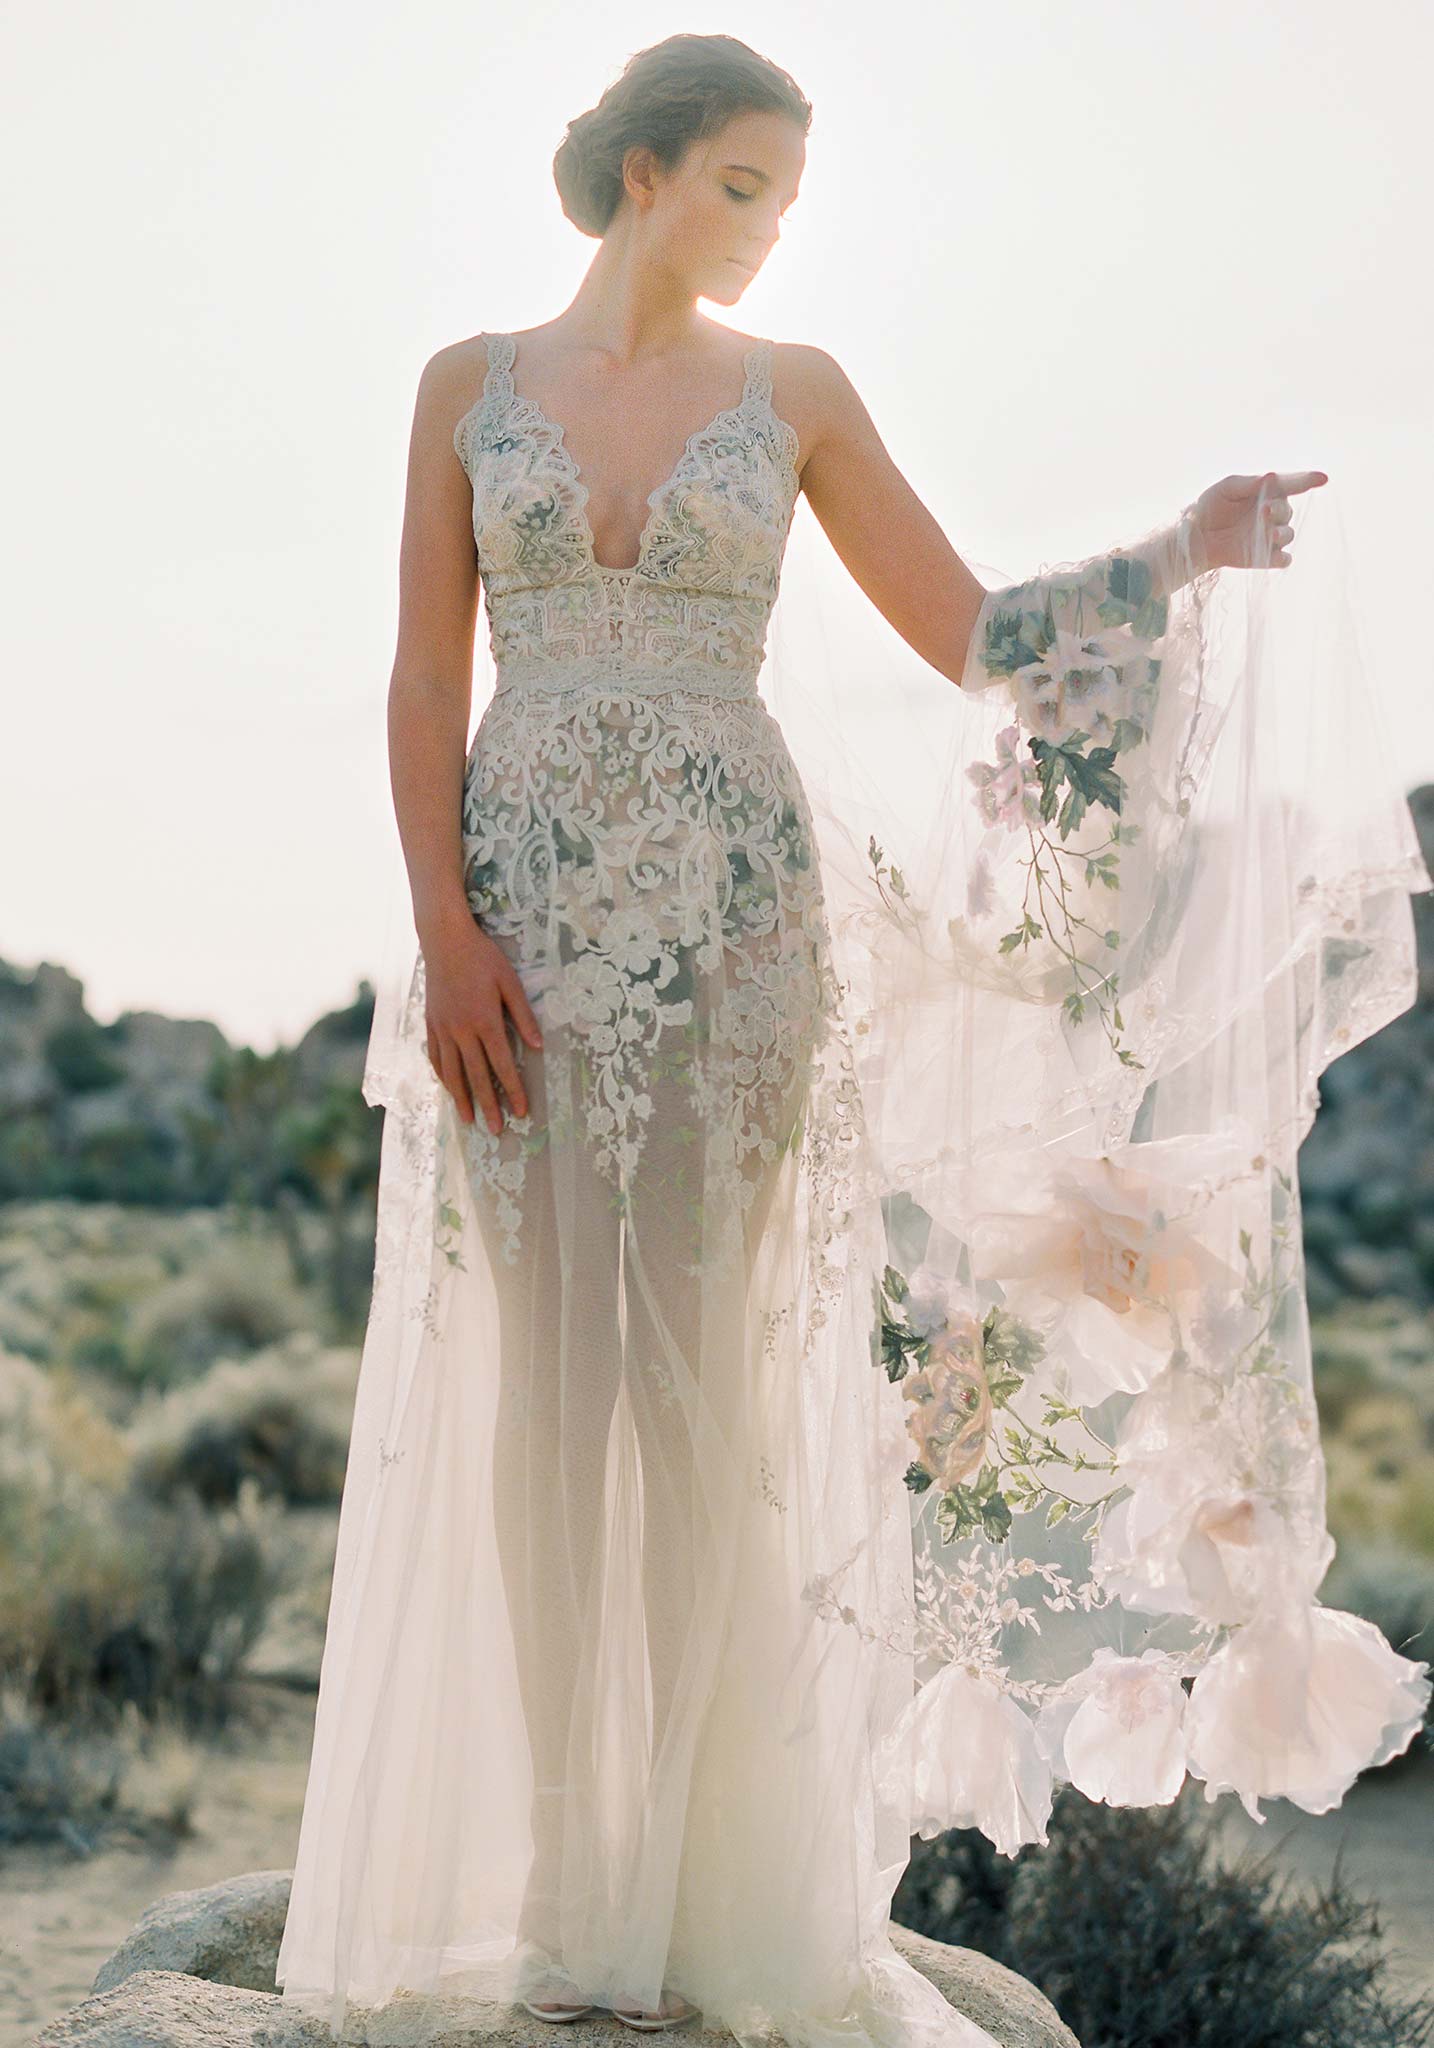 Tulle and Leaf Lace Wedding Dress | All Who Wander Wedding Dresses